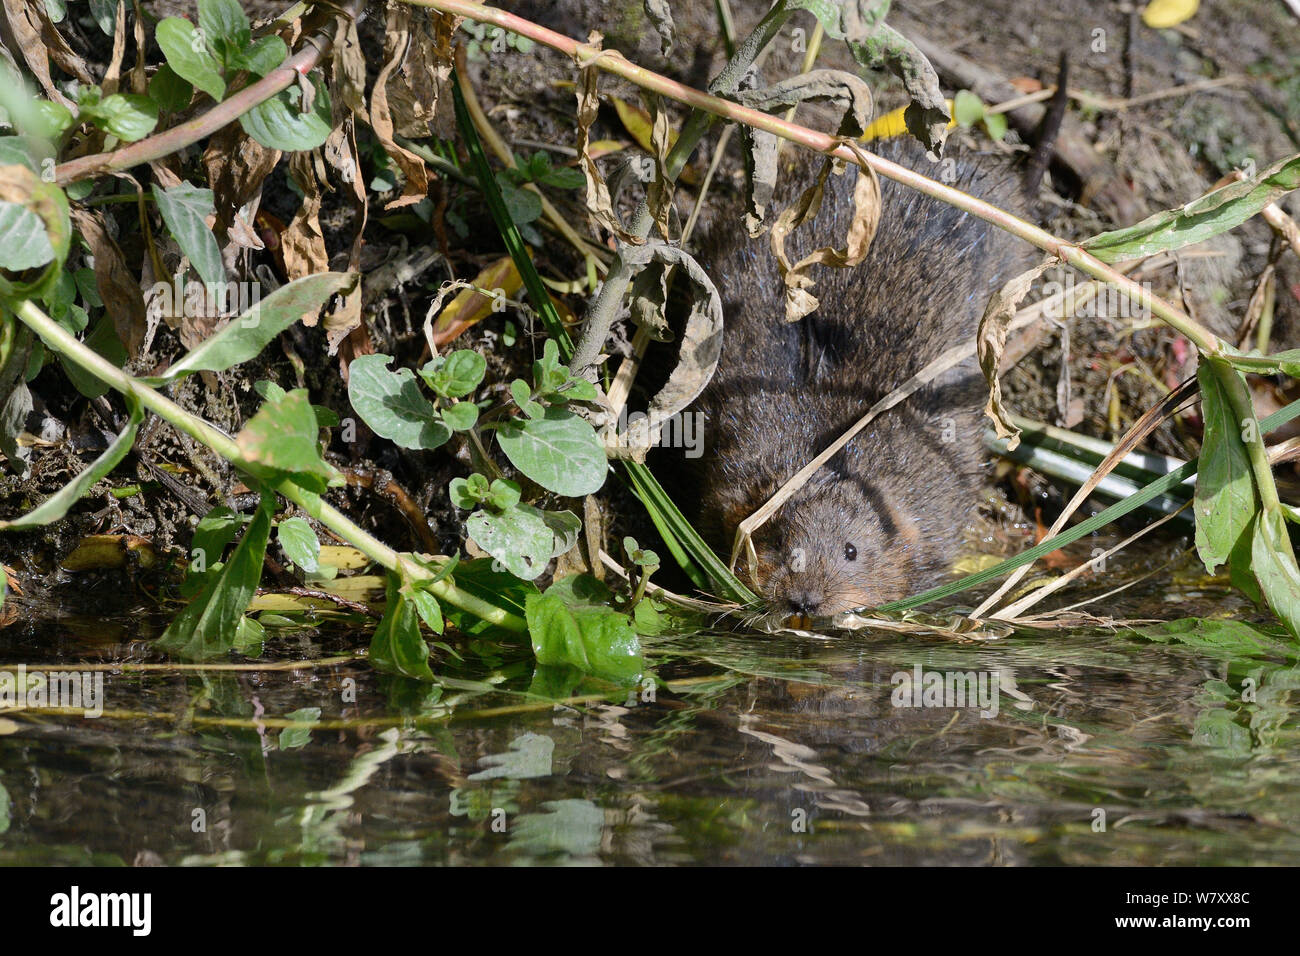 Female Water Vole (Arvicola terrestris) entering a stream with a mouthful of grasses to take to its nest burrow, UK, June. Stock Photo